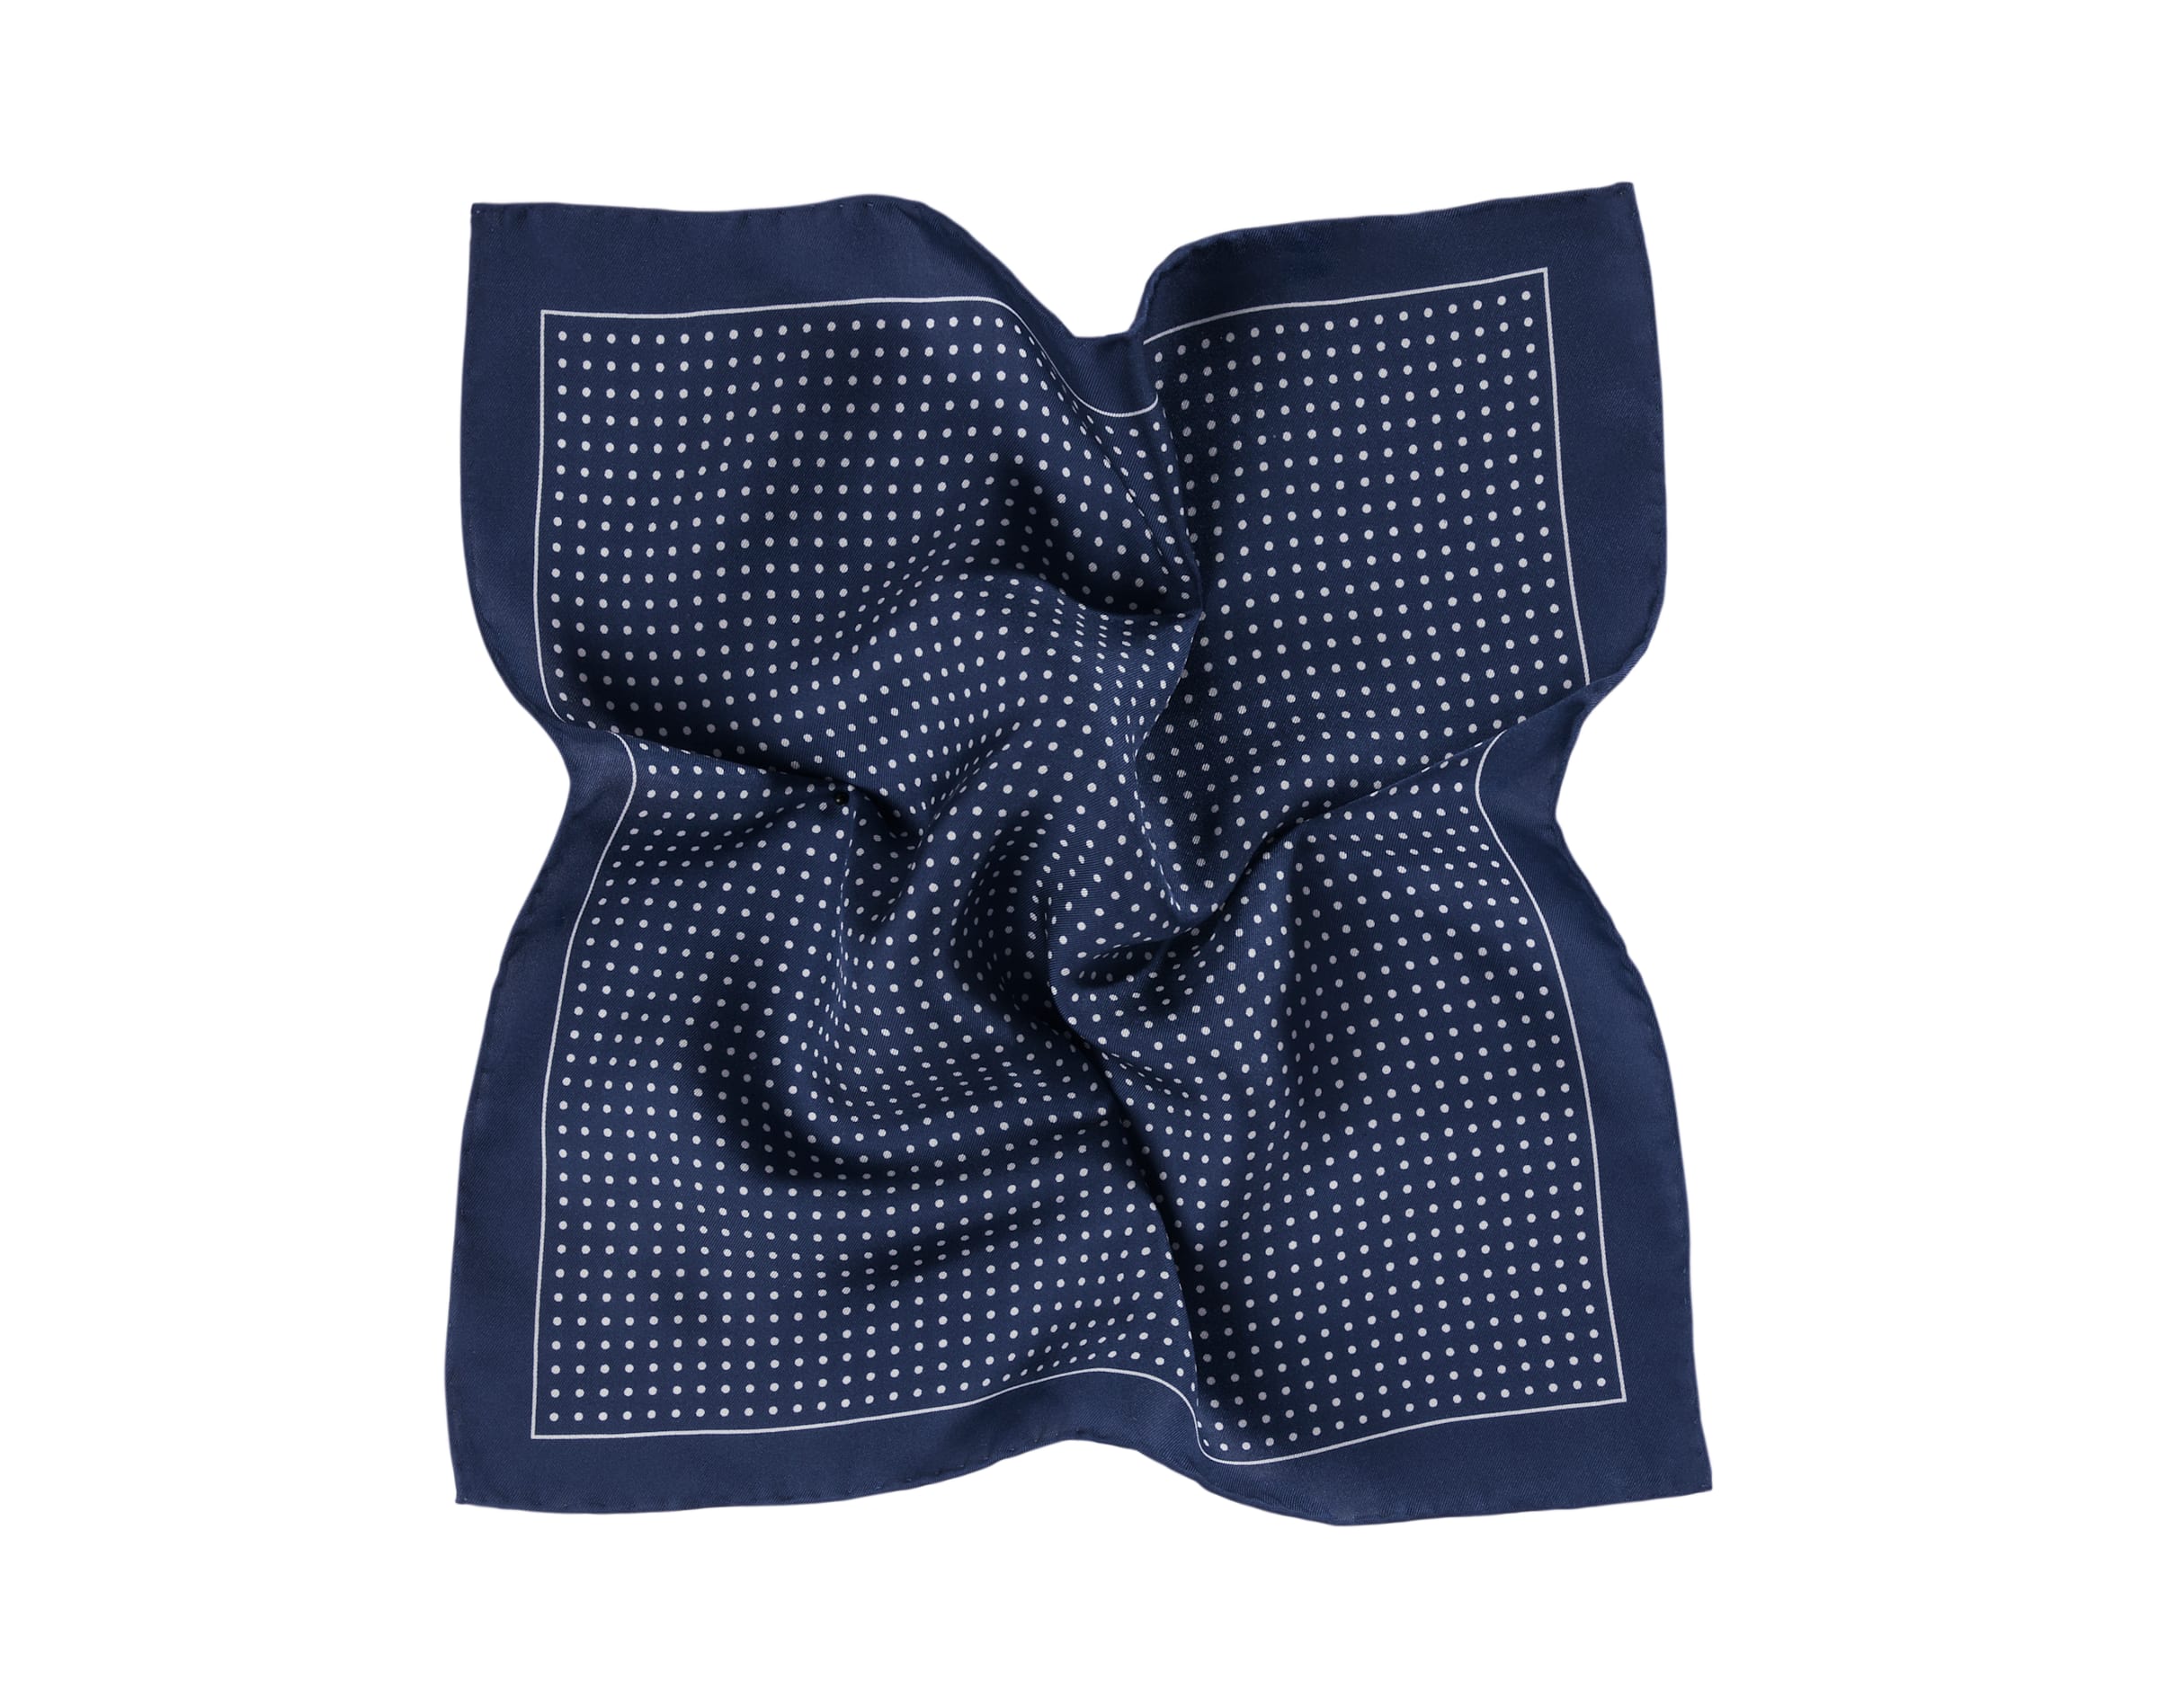 Navy Pocket Square Ps17221 | Suitsupply Online Store